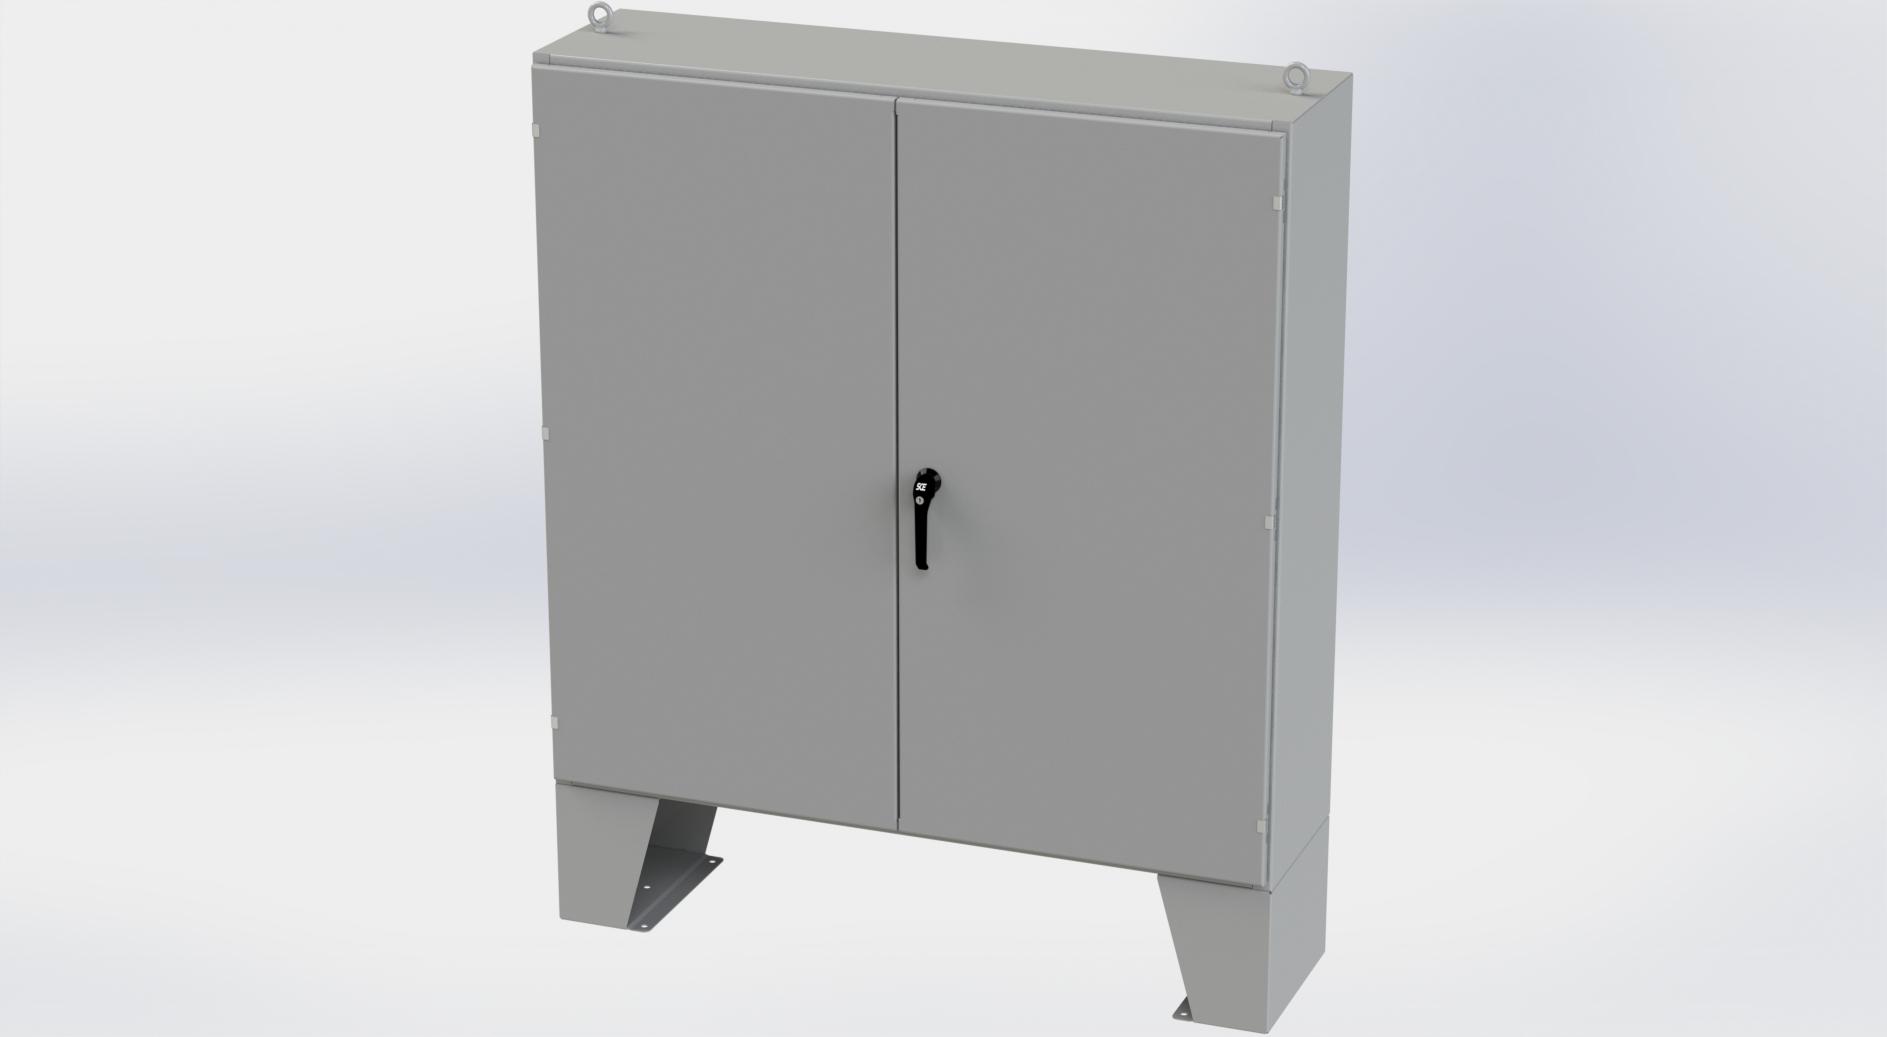 Saginaw Control SCE-606016LP 2DR LP Enclosure, Height:60.00", Width:60.00", Depth:16.00", ANSI-61 gray powder coating inside and out. Optional sub-panels are powder coated white.